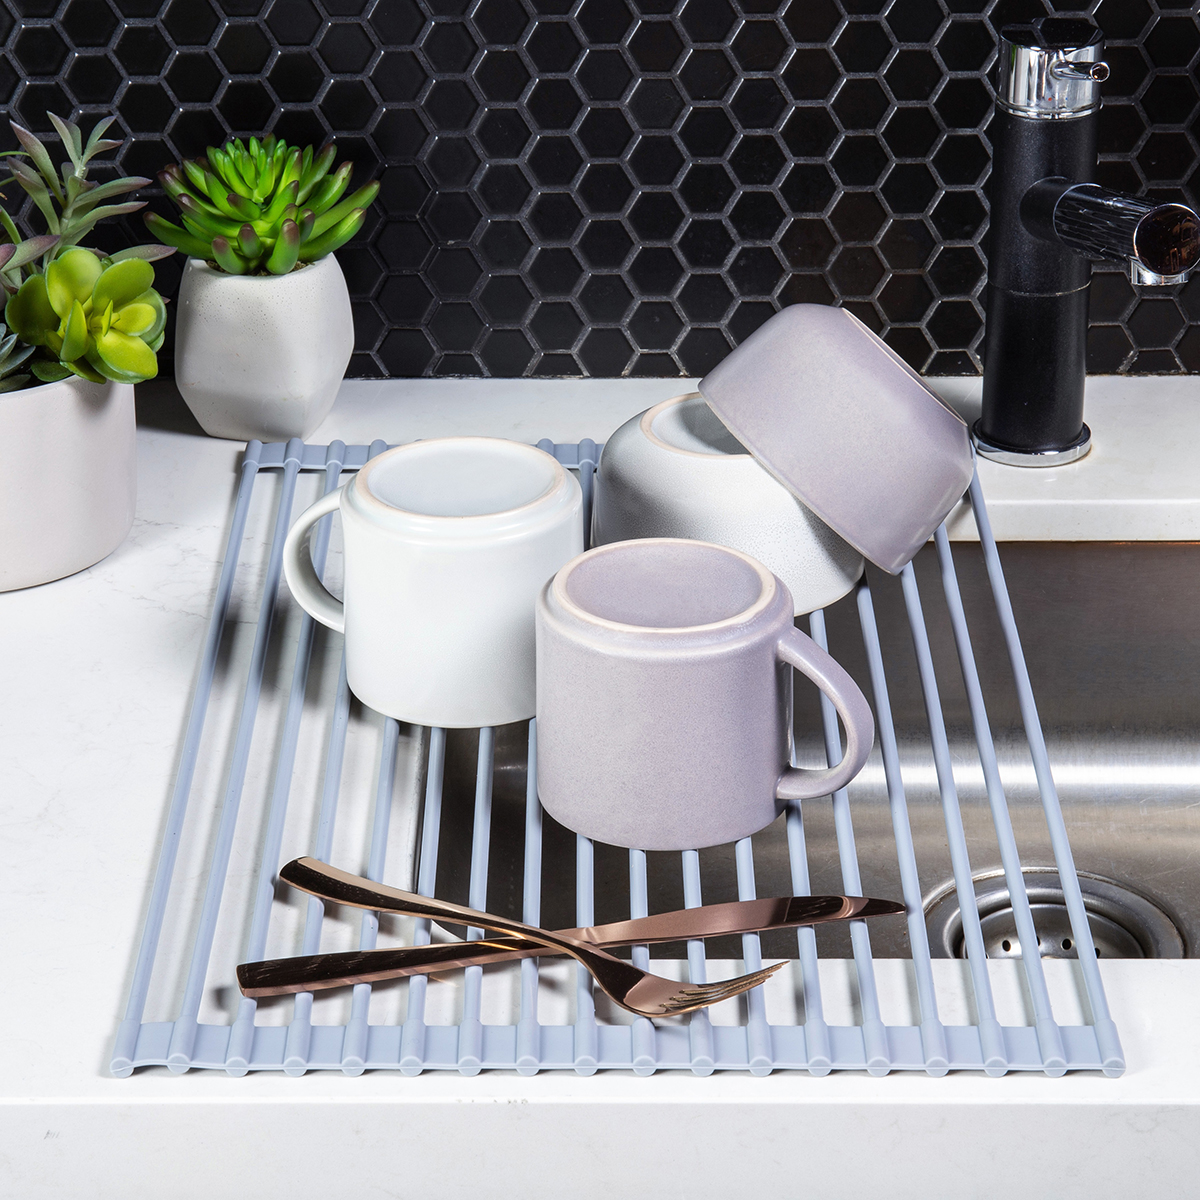 Over-the-Sink Roll-Up Drying Rack | The Container Store